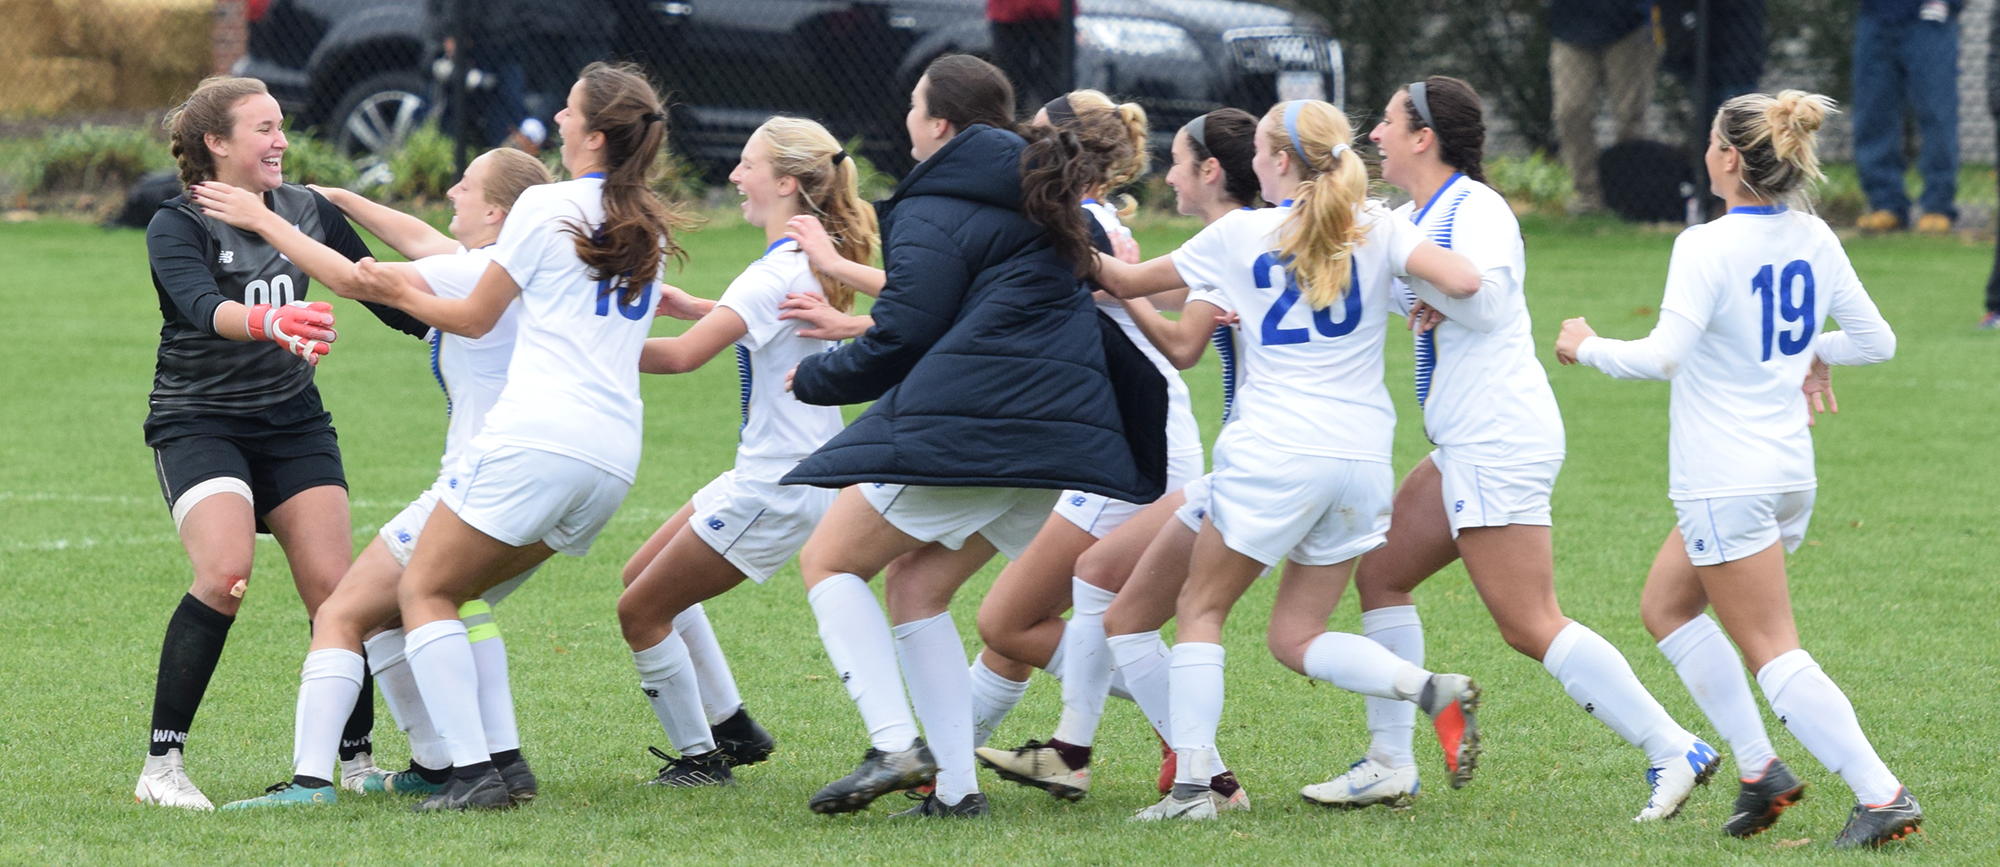 Western New England advanced to the CCC Tournament semifinals for the second consecutive season with a PK shootout win over Roger Williams on Sunday.